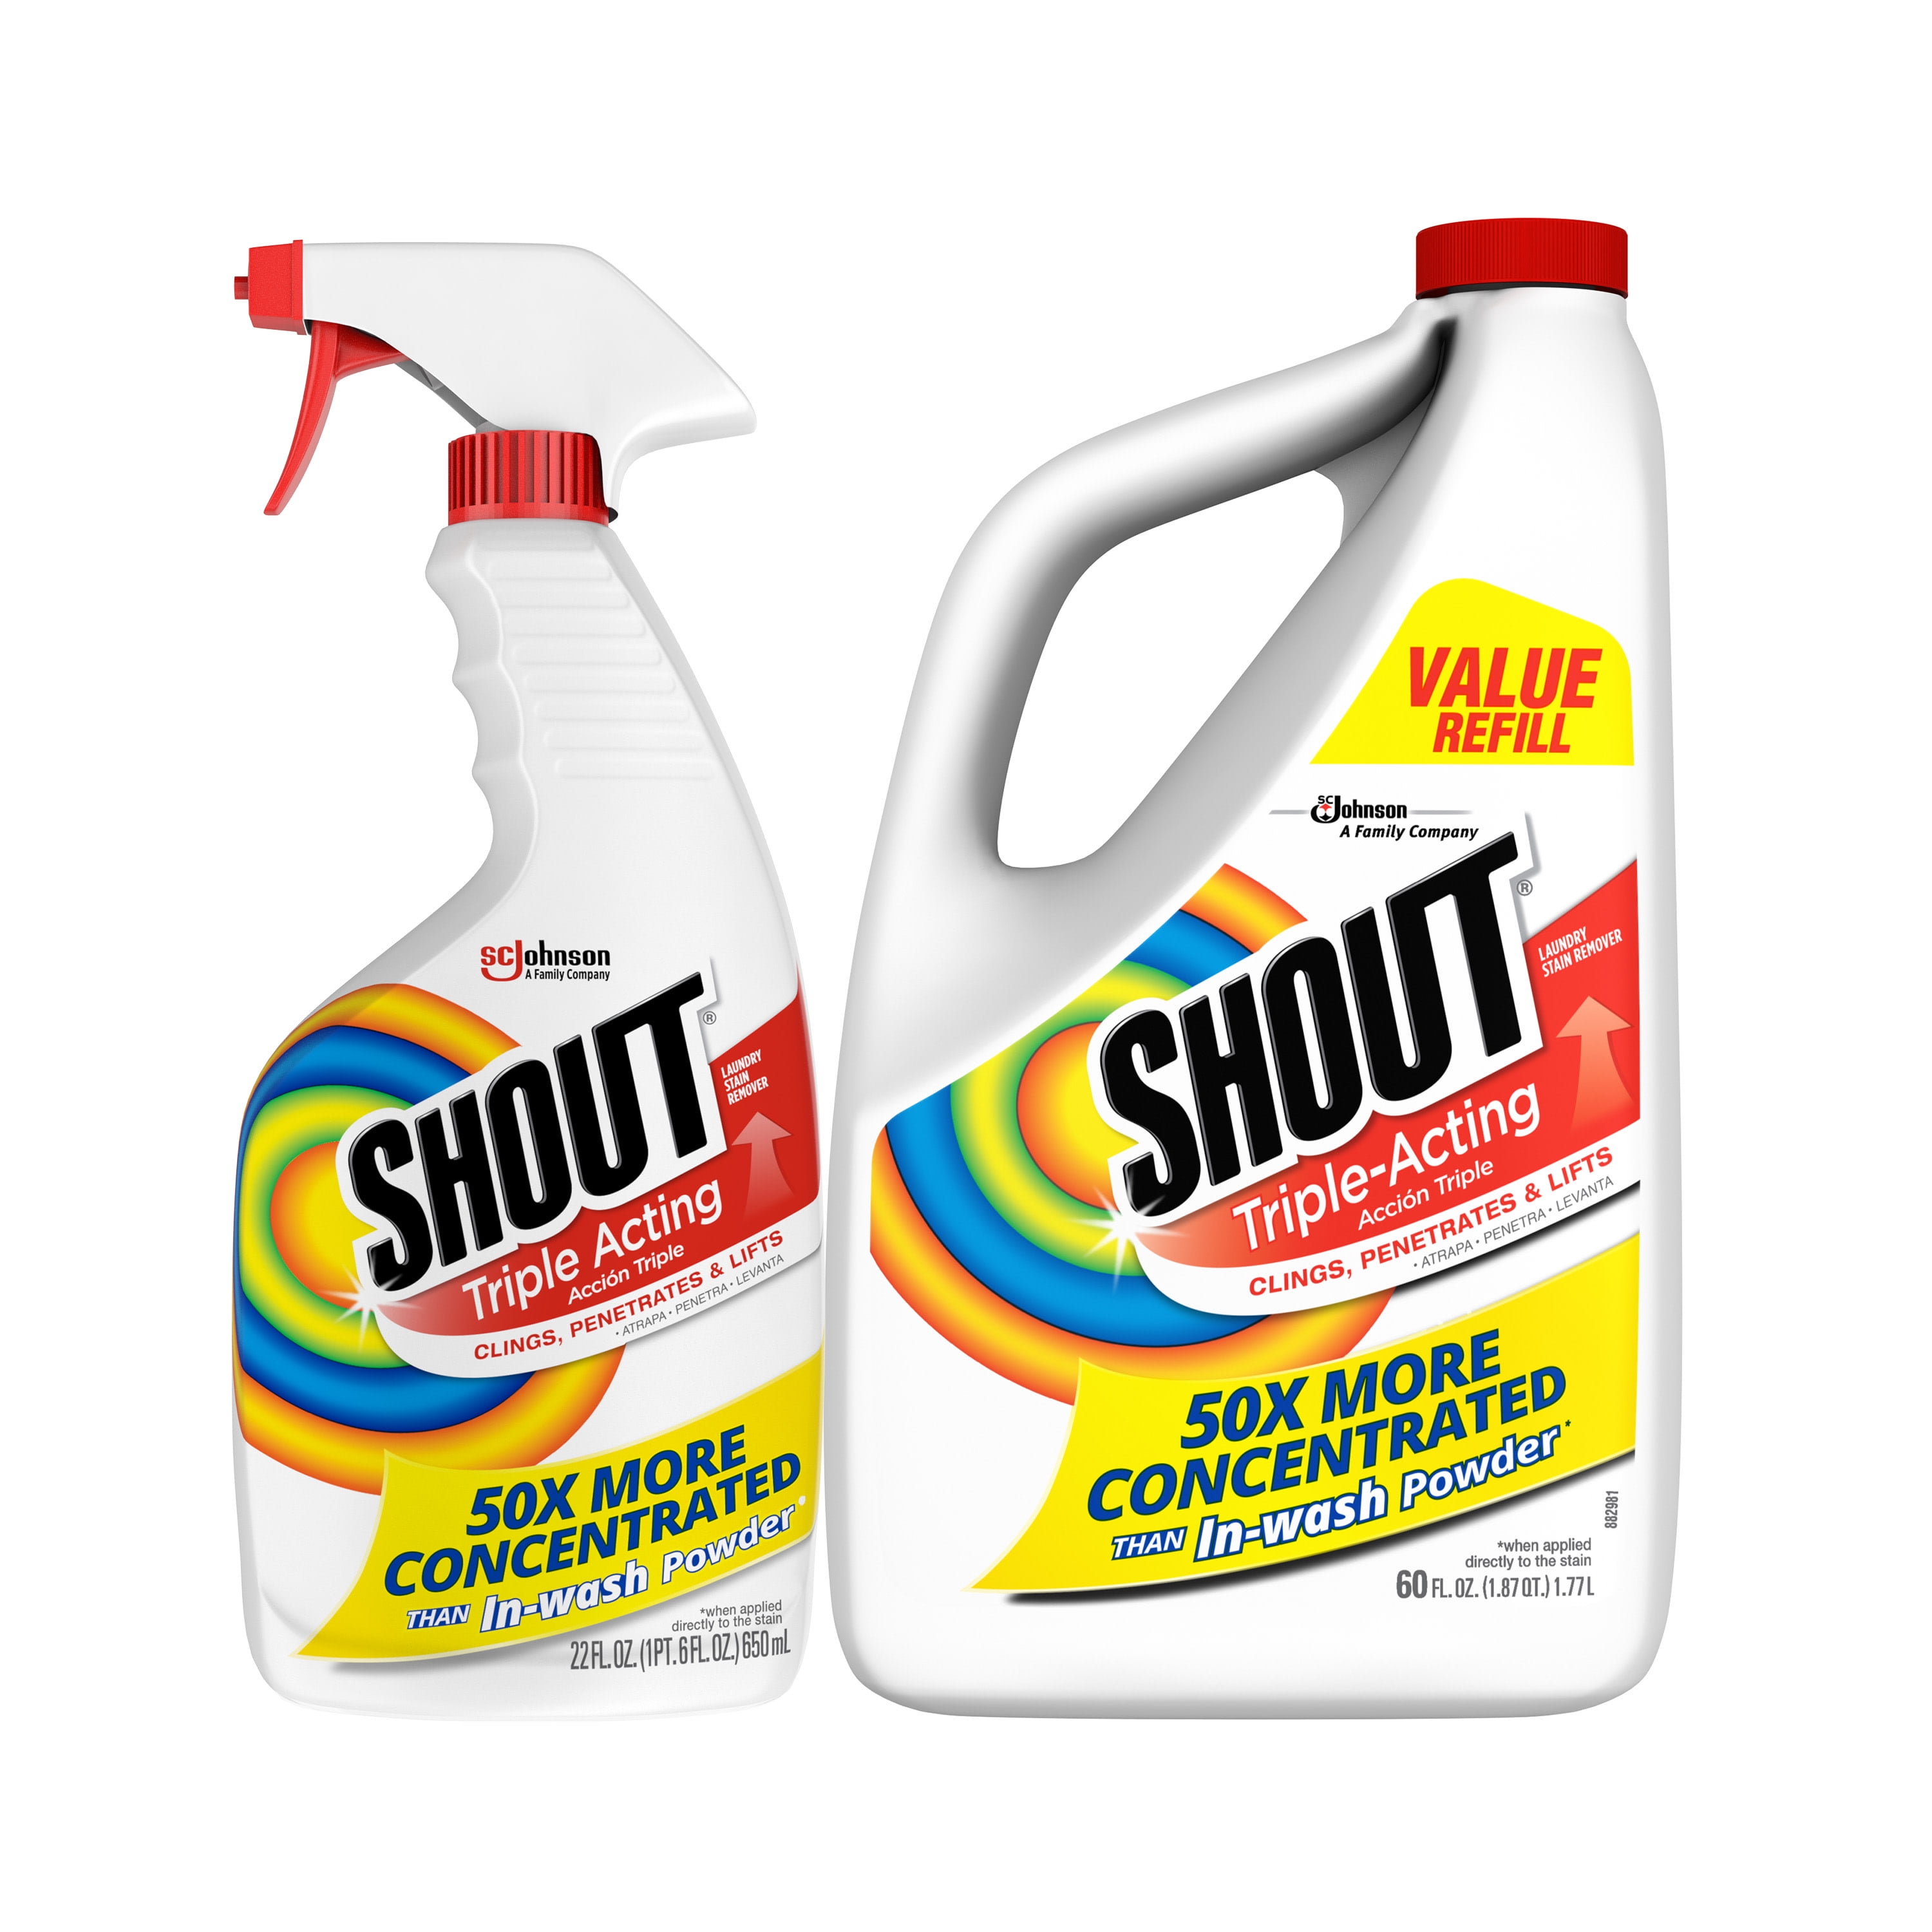 Shout Triple-Acting Refill, Laundry Stain Remover, 60oz